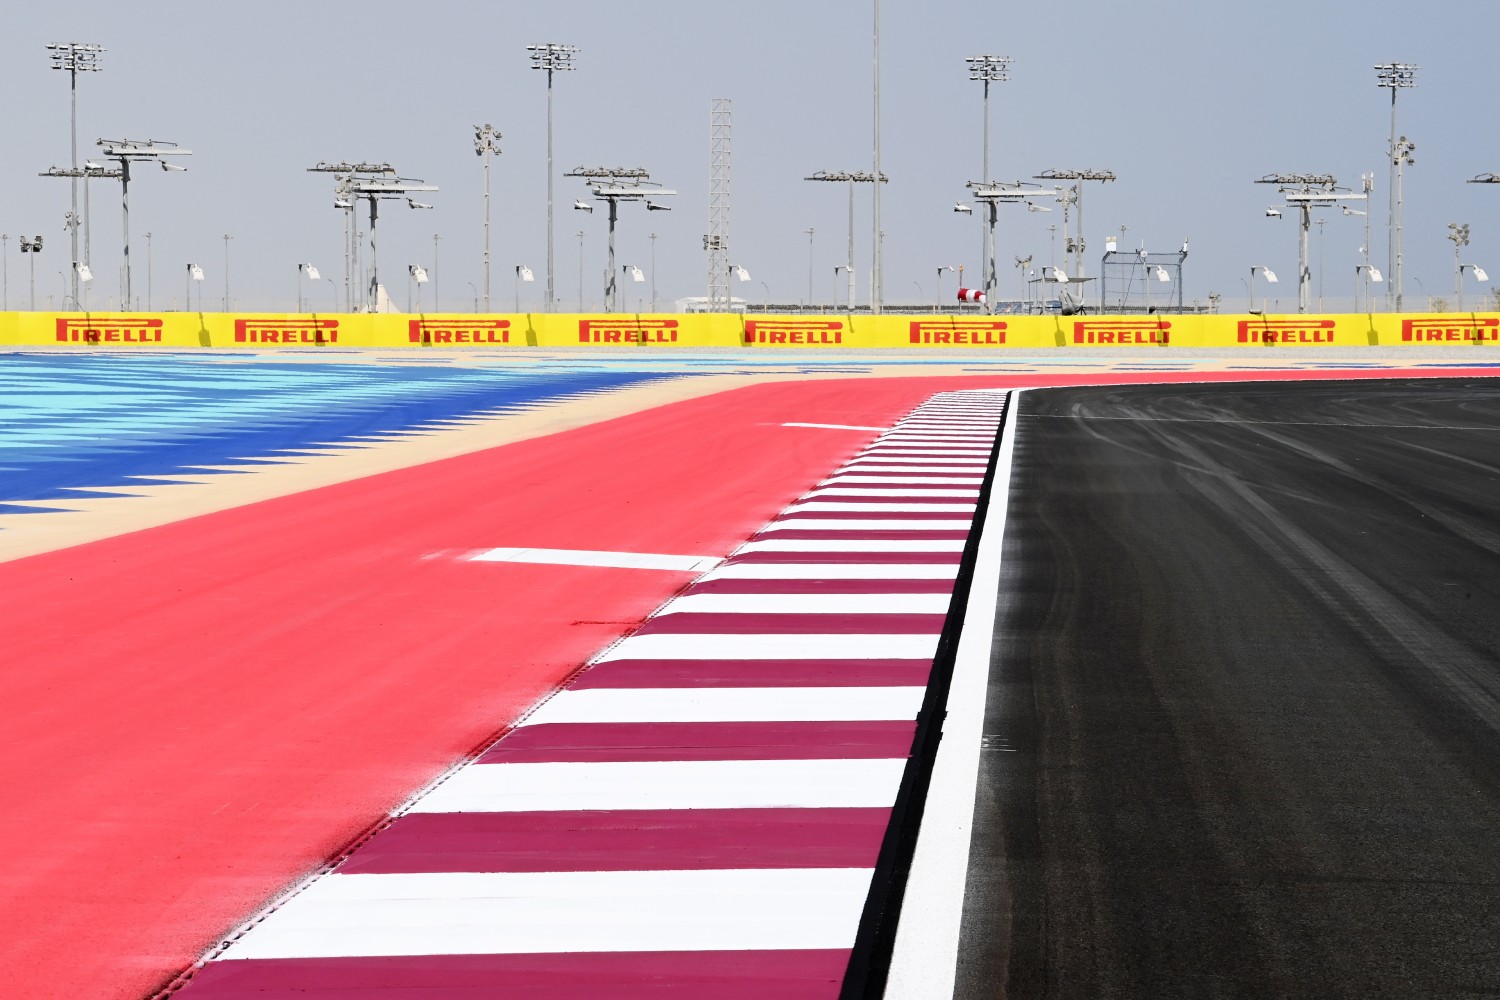 Pirelli proof of performance during the Qatar GP at Losail International Circuit on Wednesday October 04, 2023 in Losail, Qatar. (Photo by Mark Sutton / LAT Images)